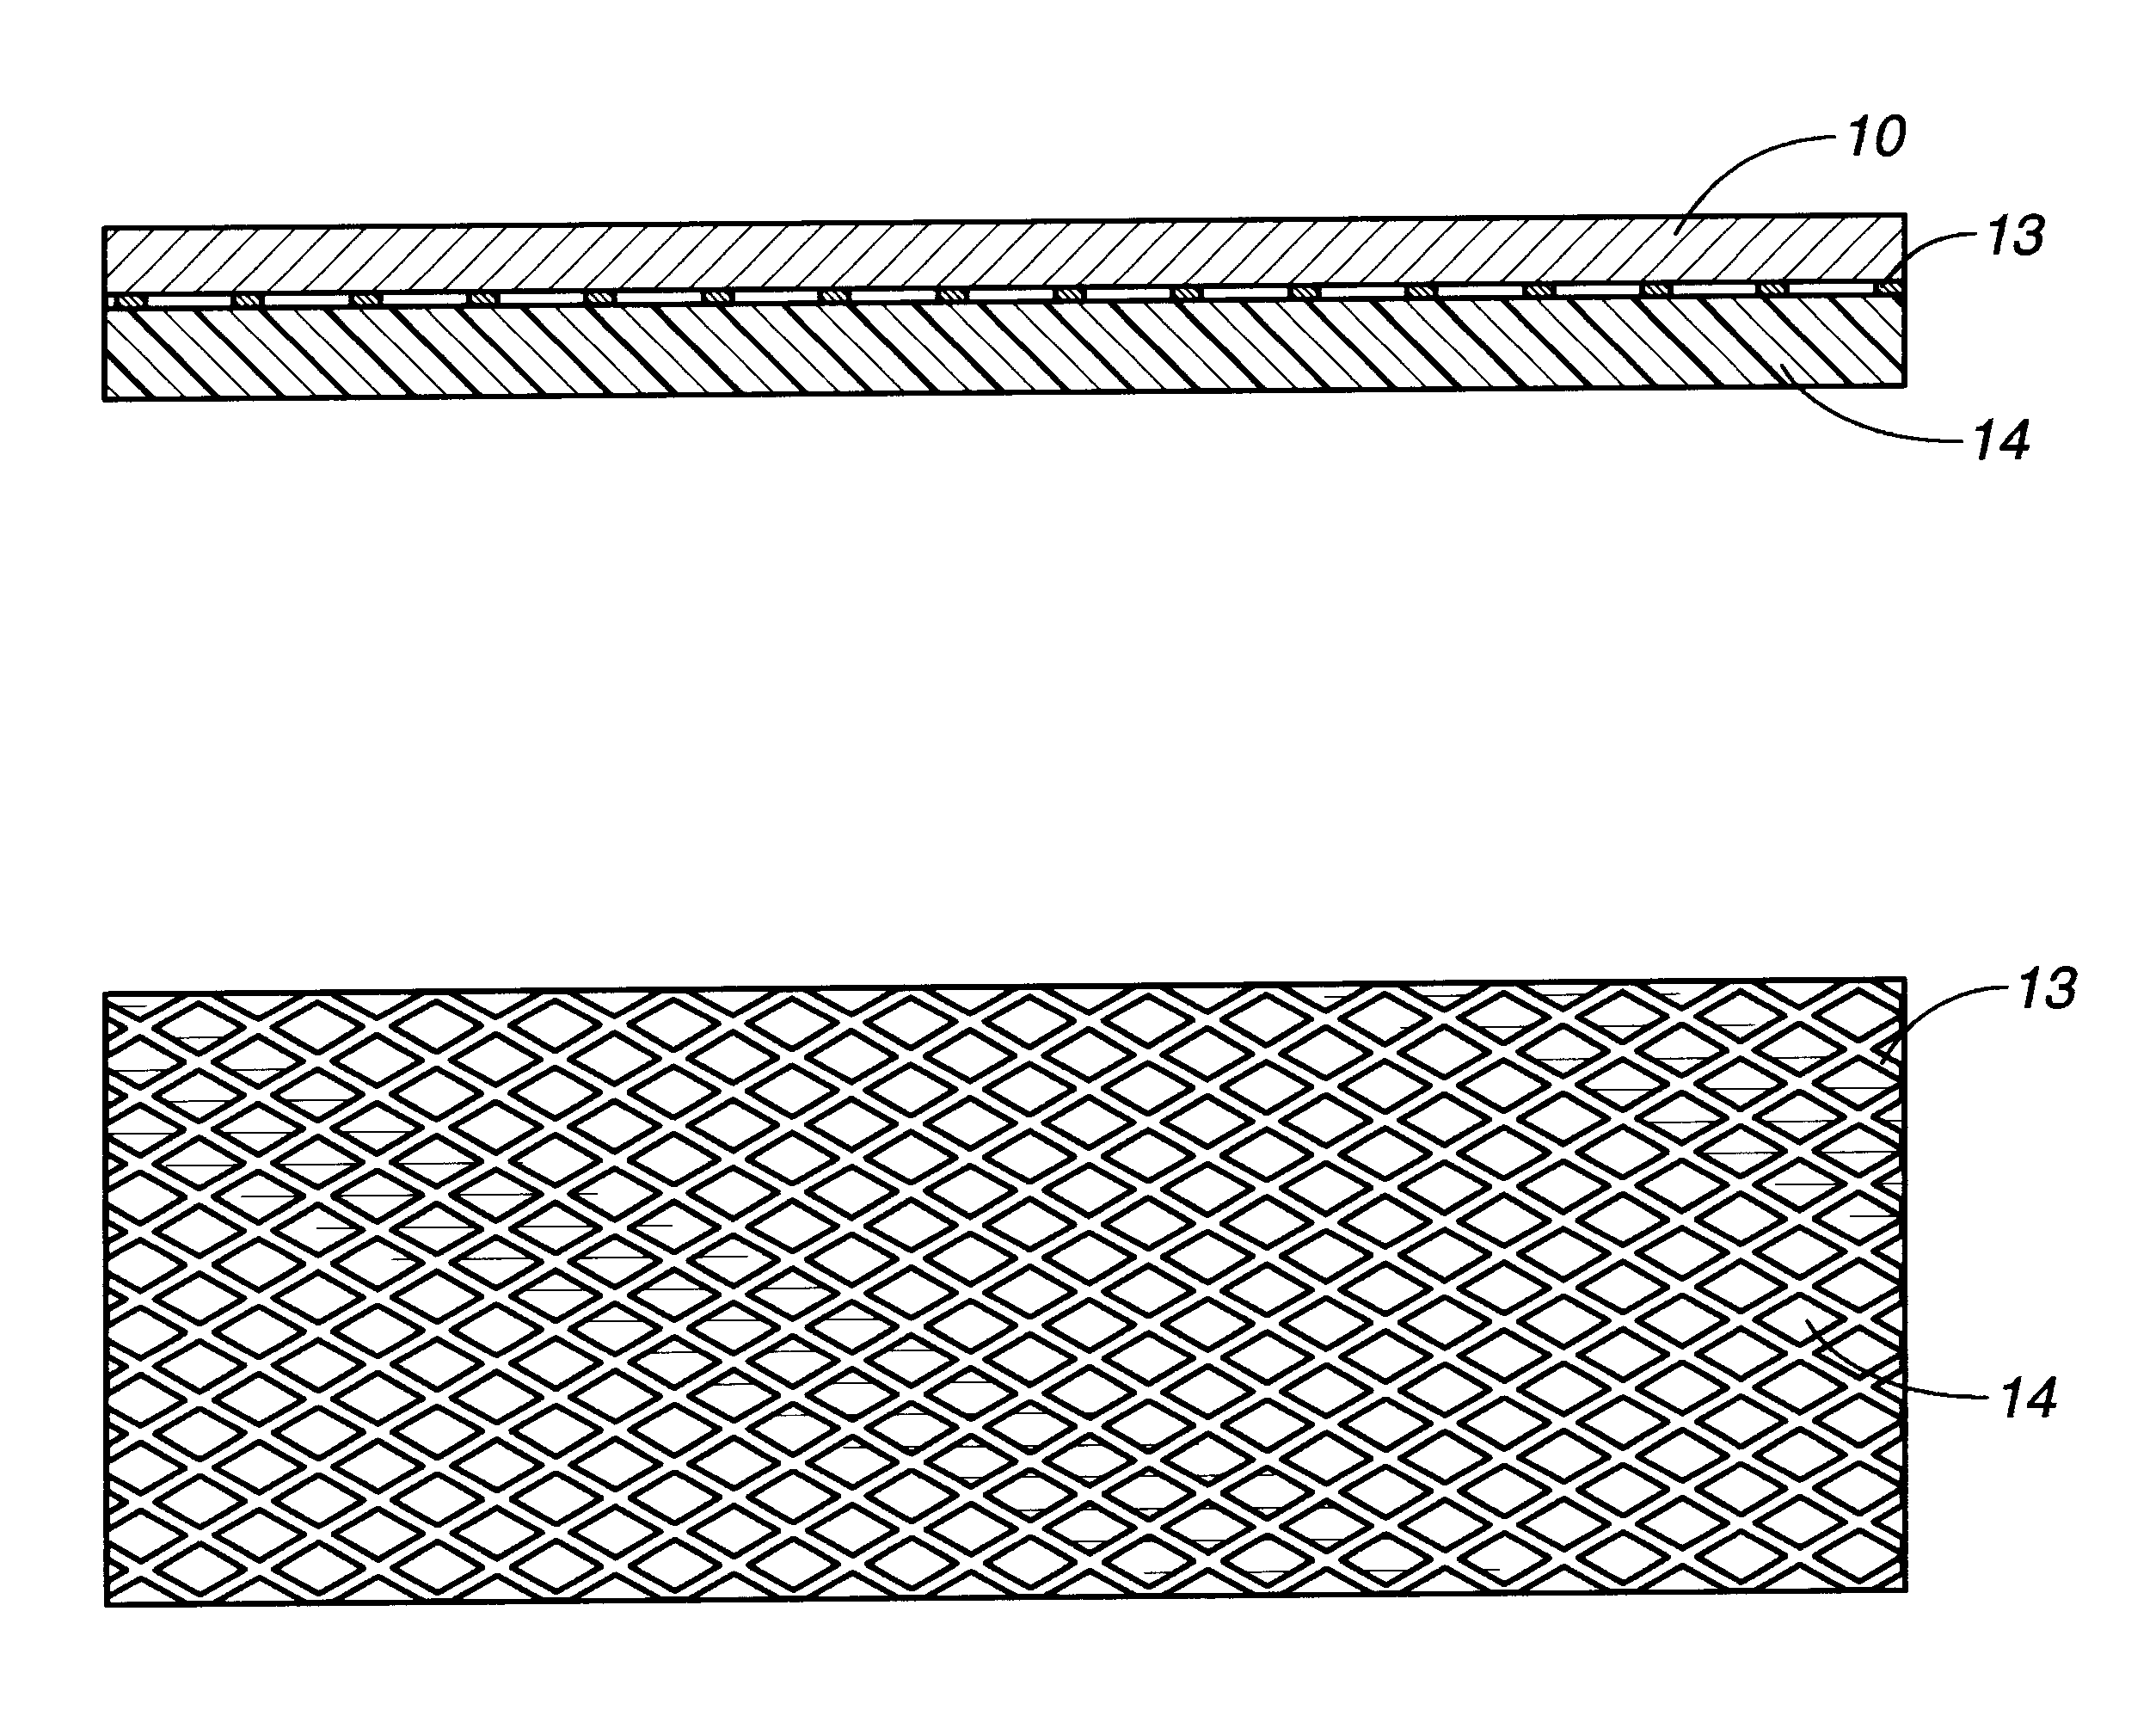 Electrically conductive adhesive tape